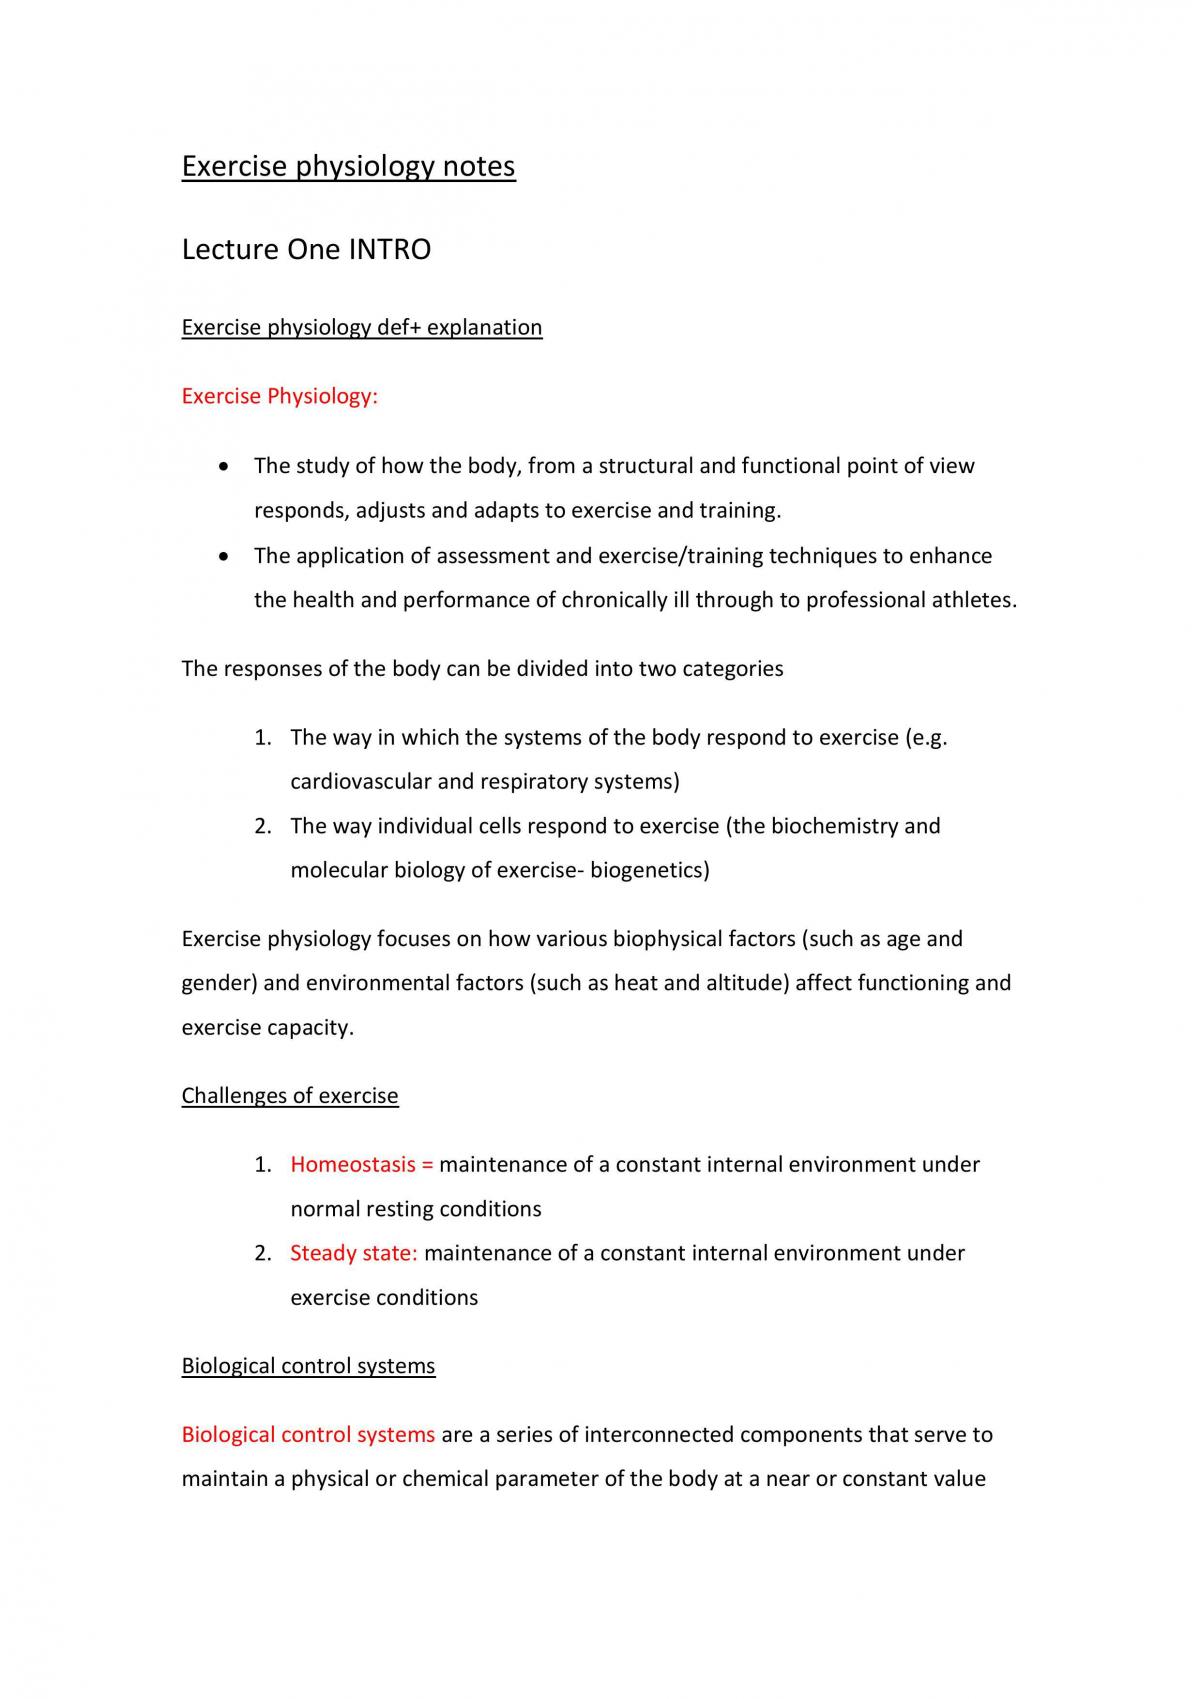 Full Lecture Notes  - Page 1